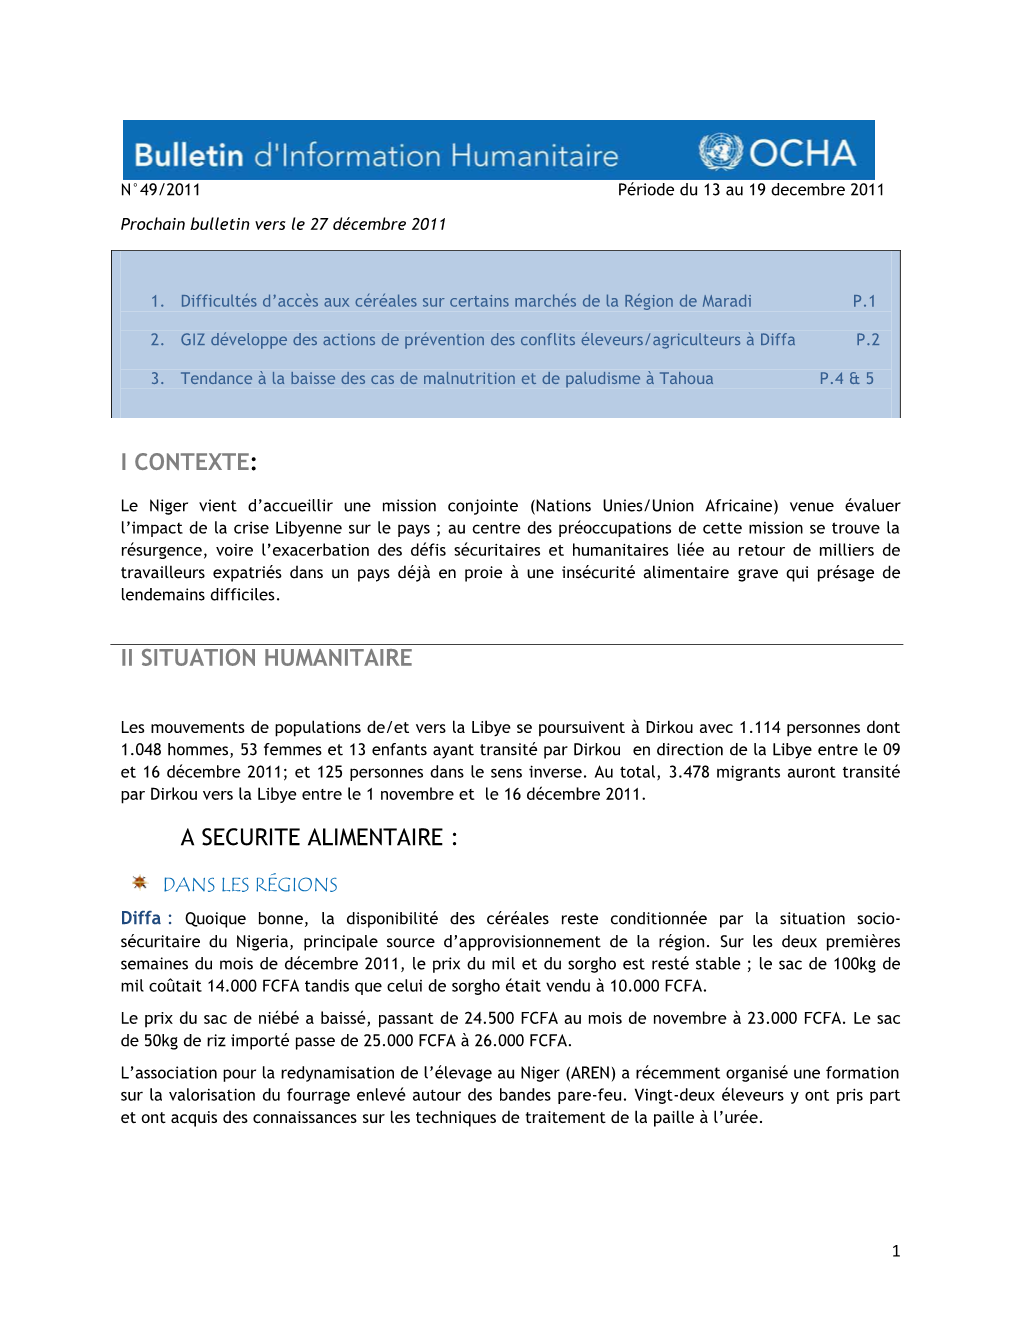 Ii Situation Humanitaire a Securite Alimentaire